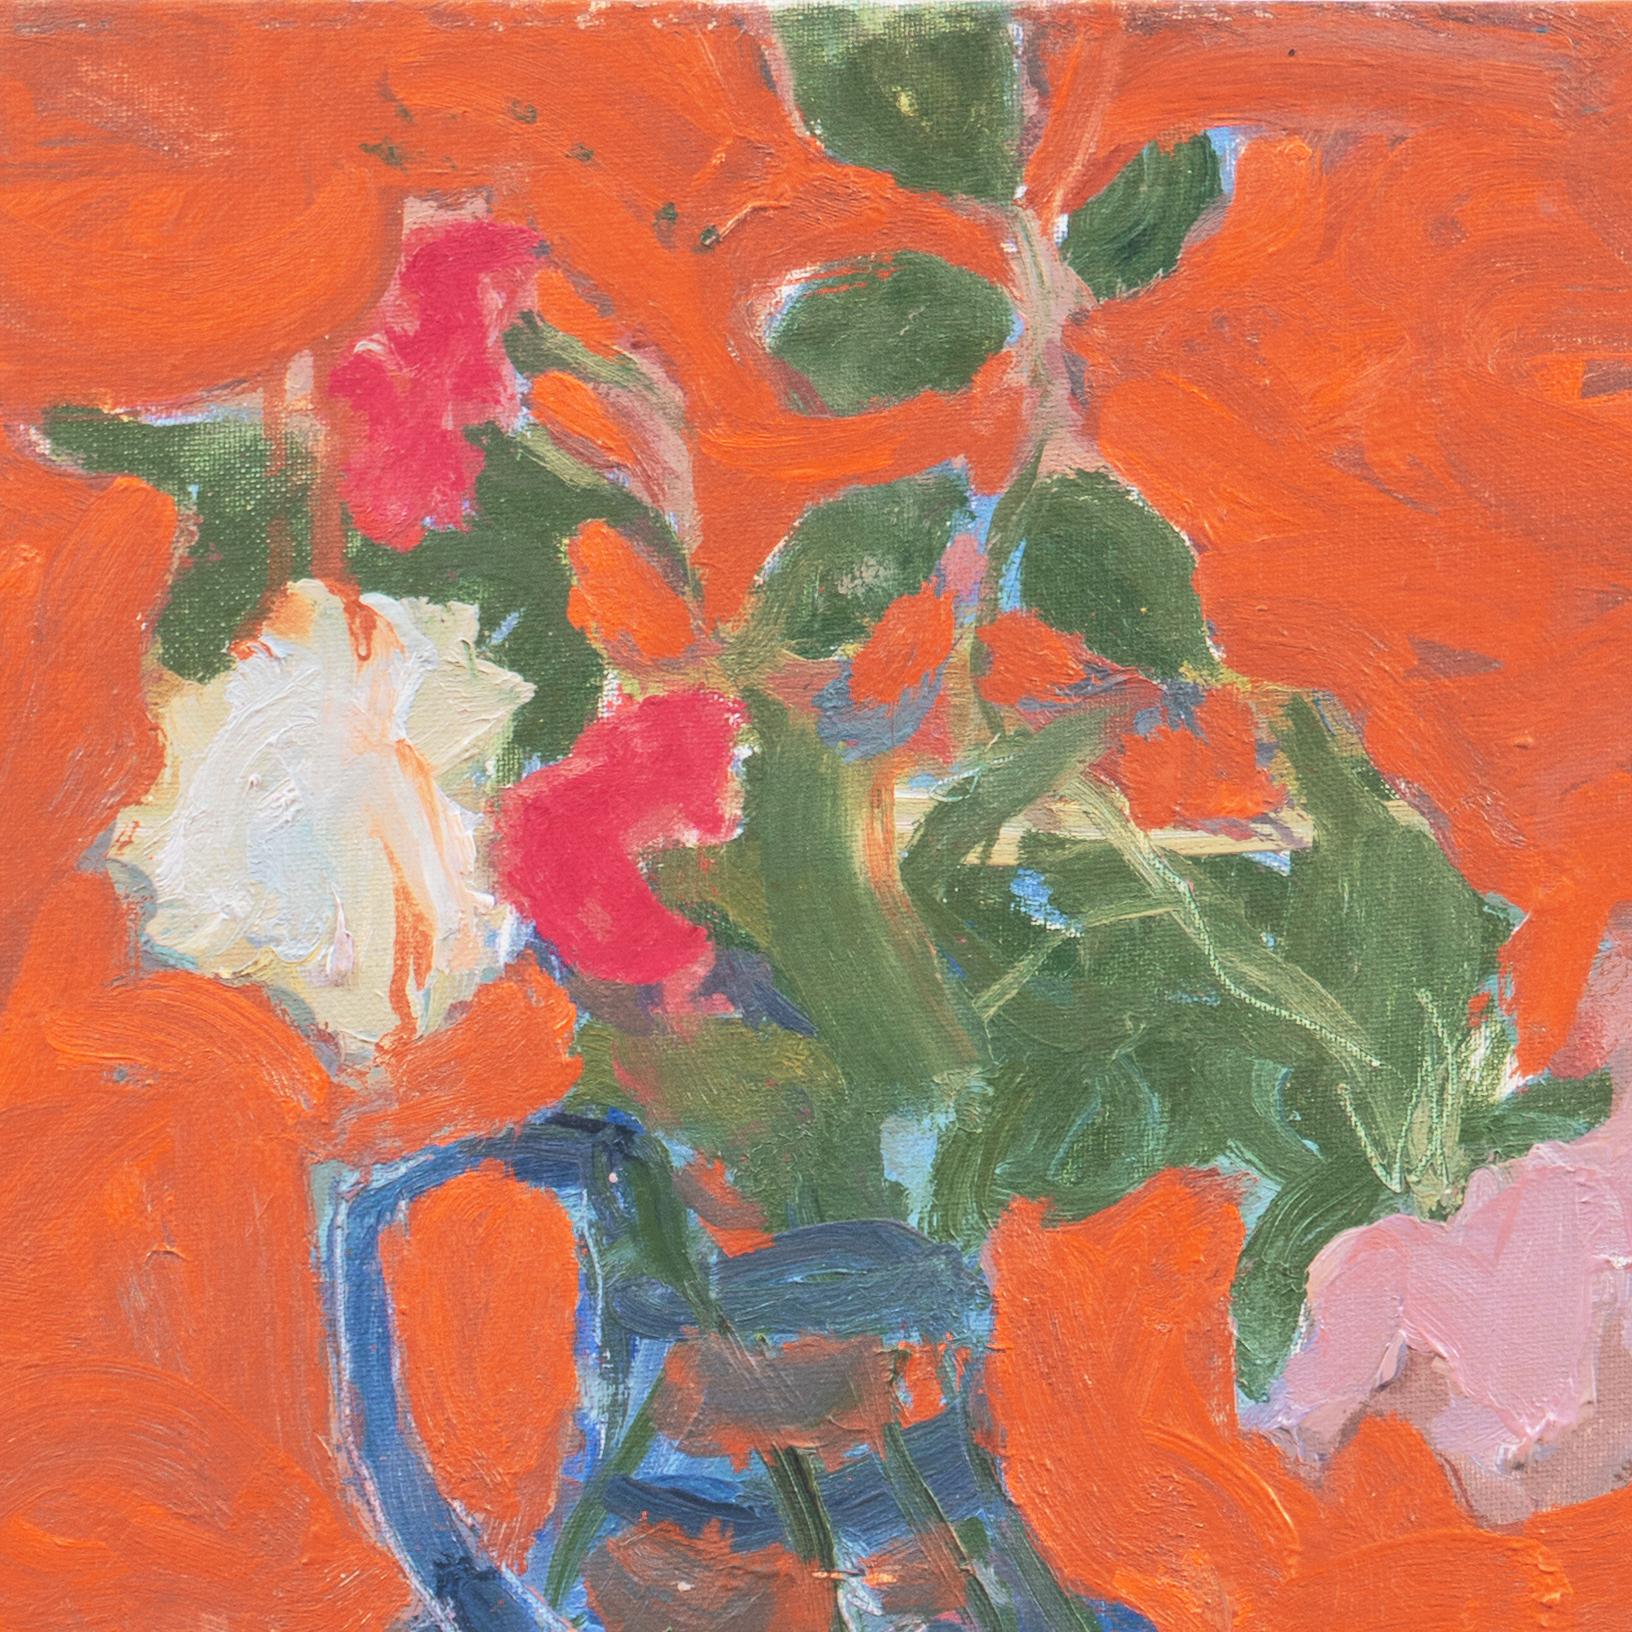 'Pink Roses in a Blue Jug', Paris, Louvre, Académie Chaumière, Carmel California - Post-Impressionist Painting by Victor Di Gesu